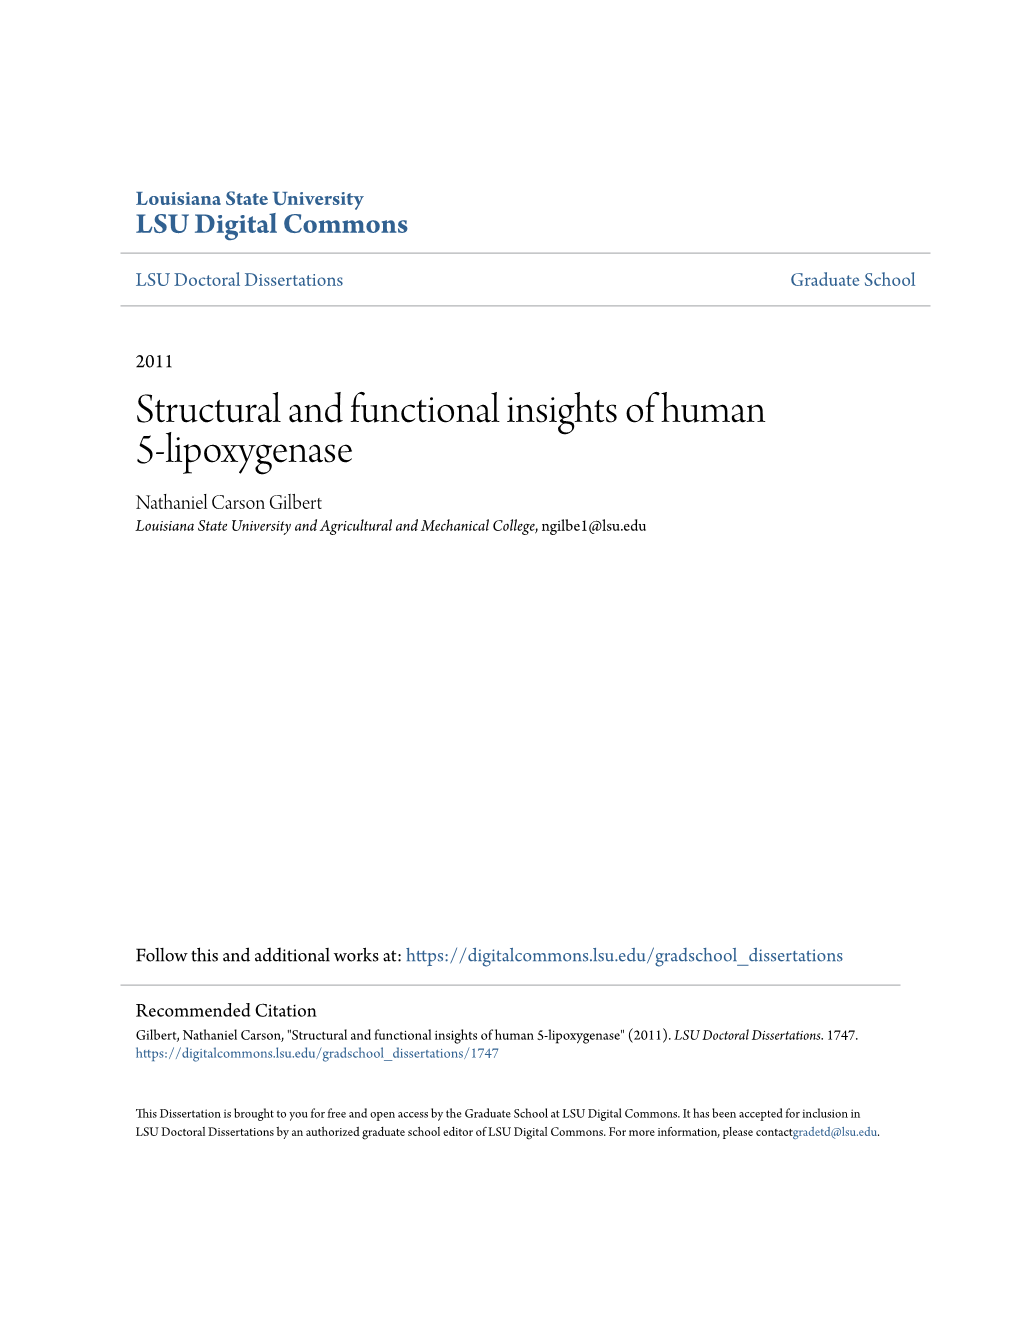 Structural and Functional Insights of Human 5-Lipoxygenase